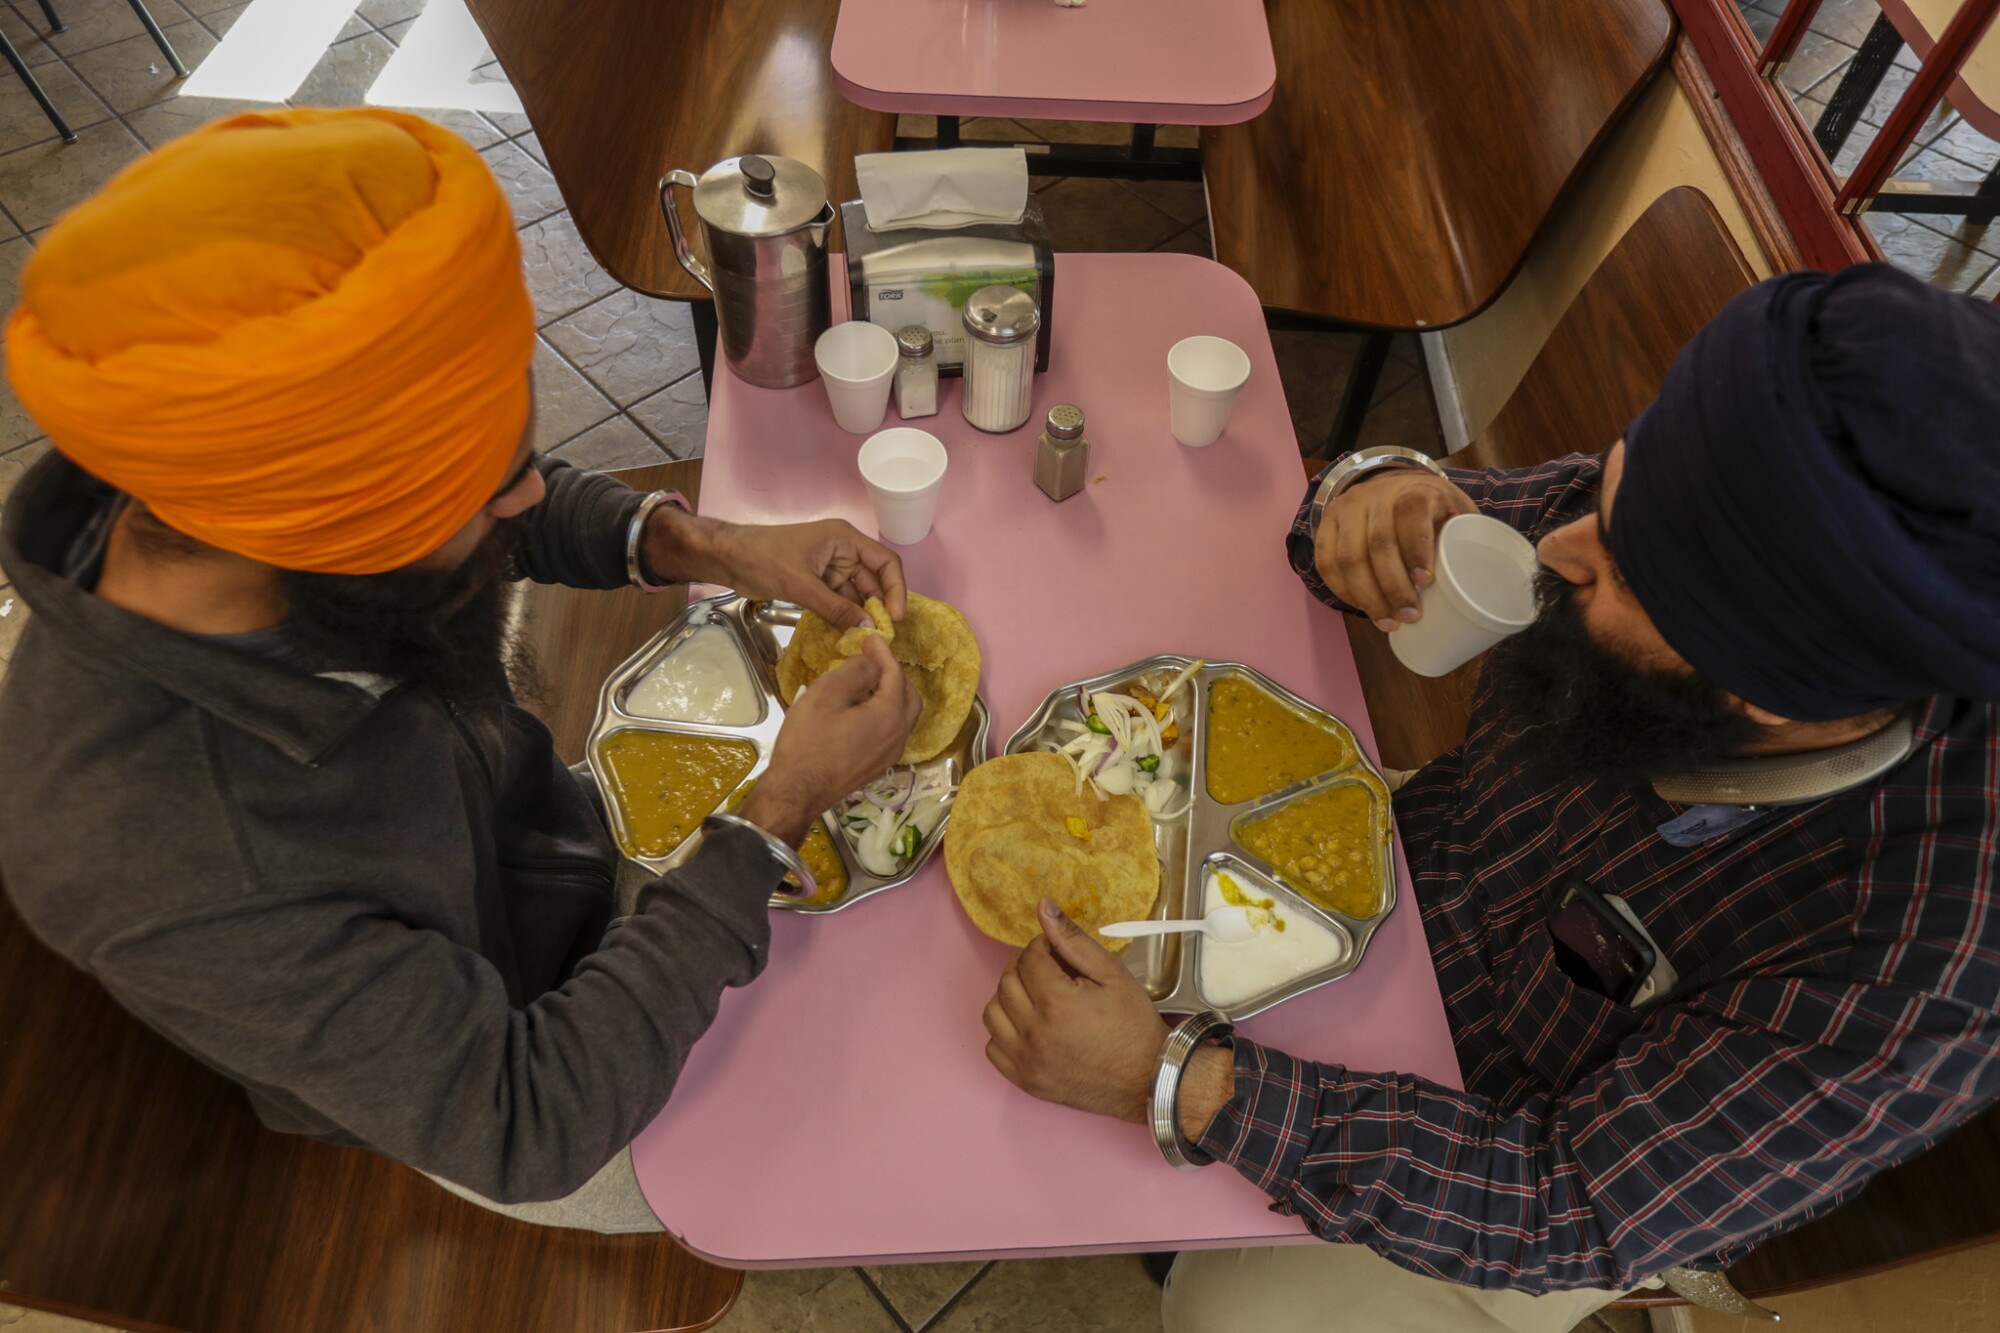 Two Sikh truckers have dinner.